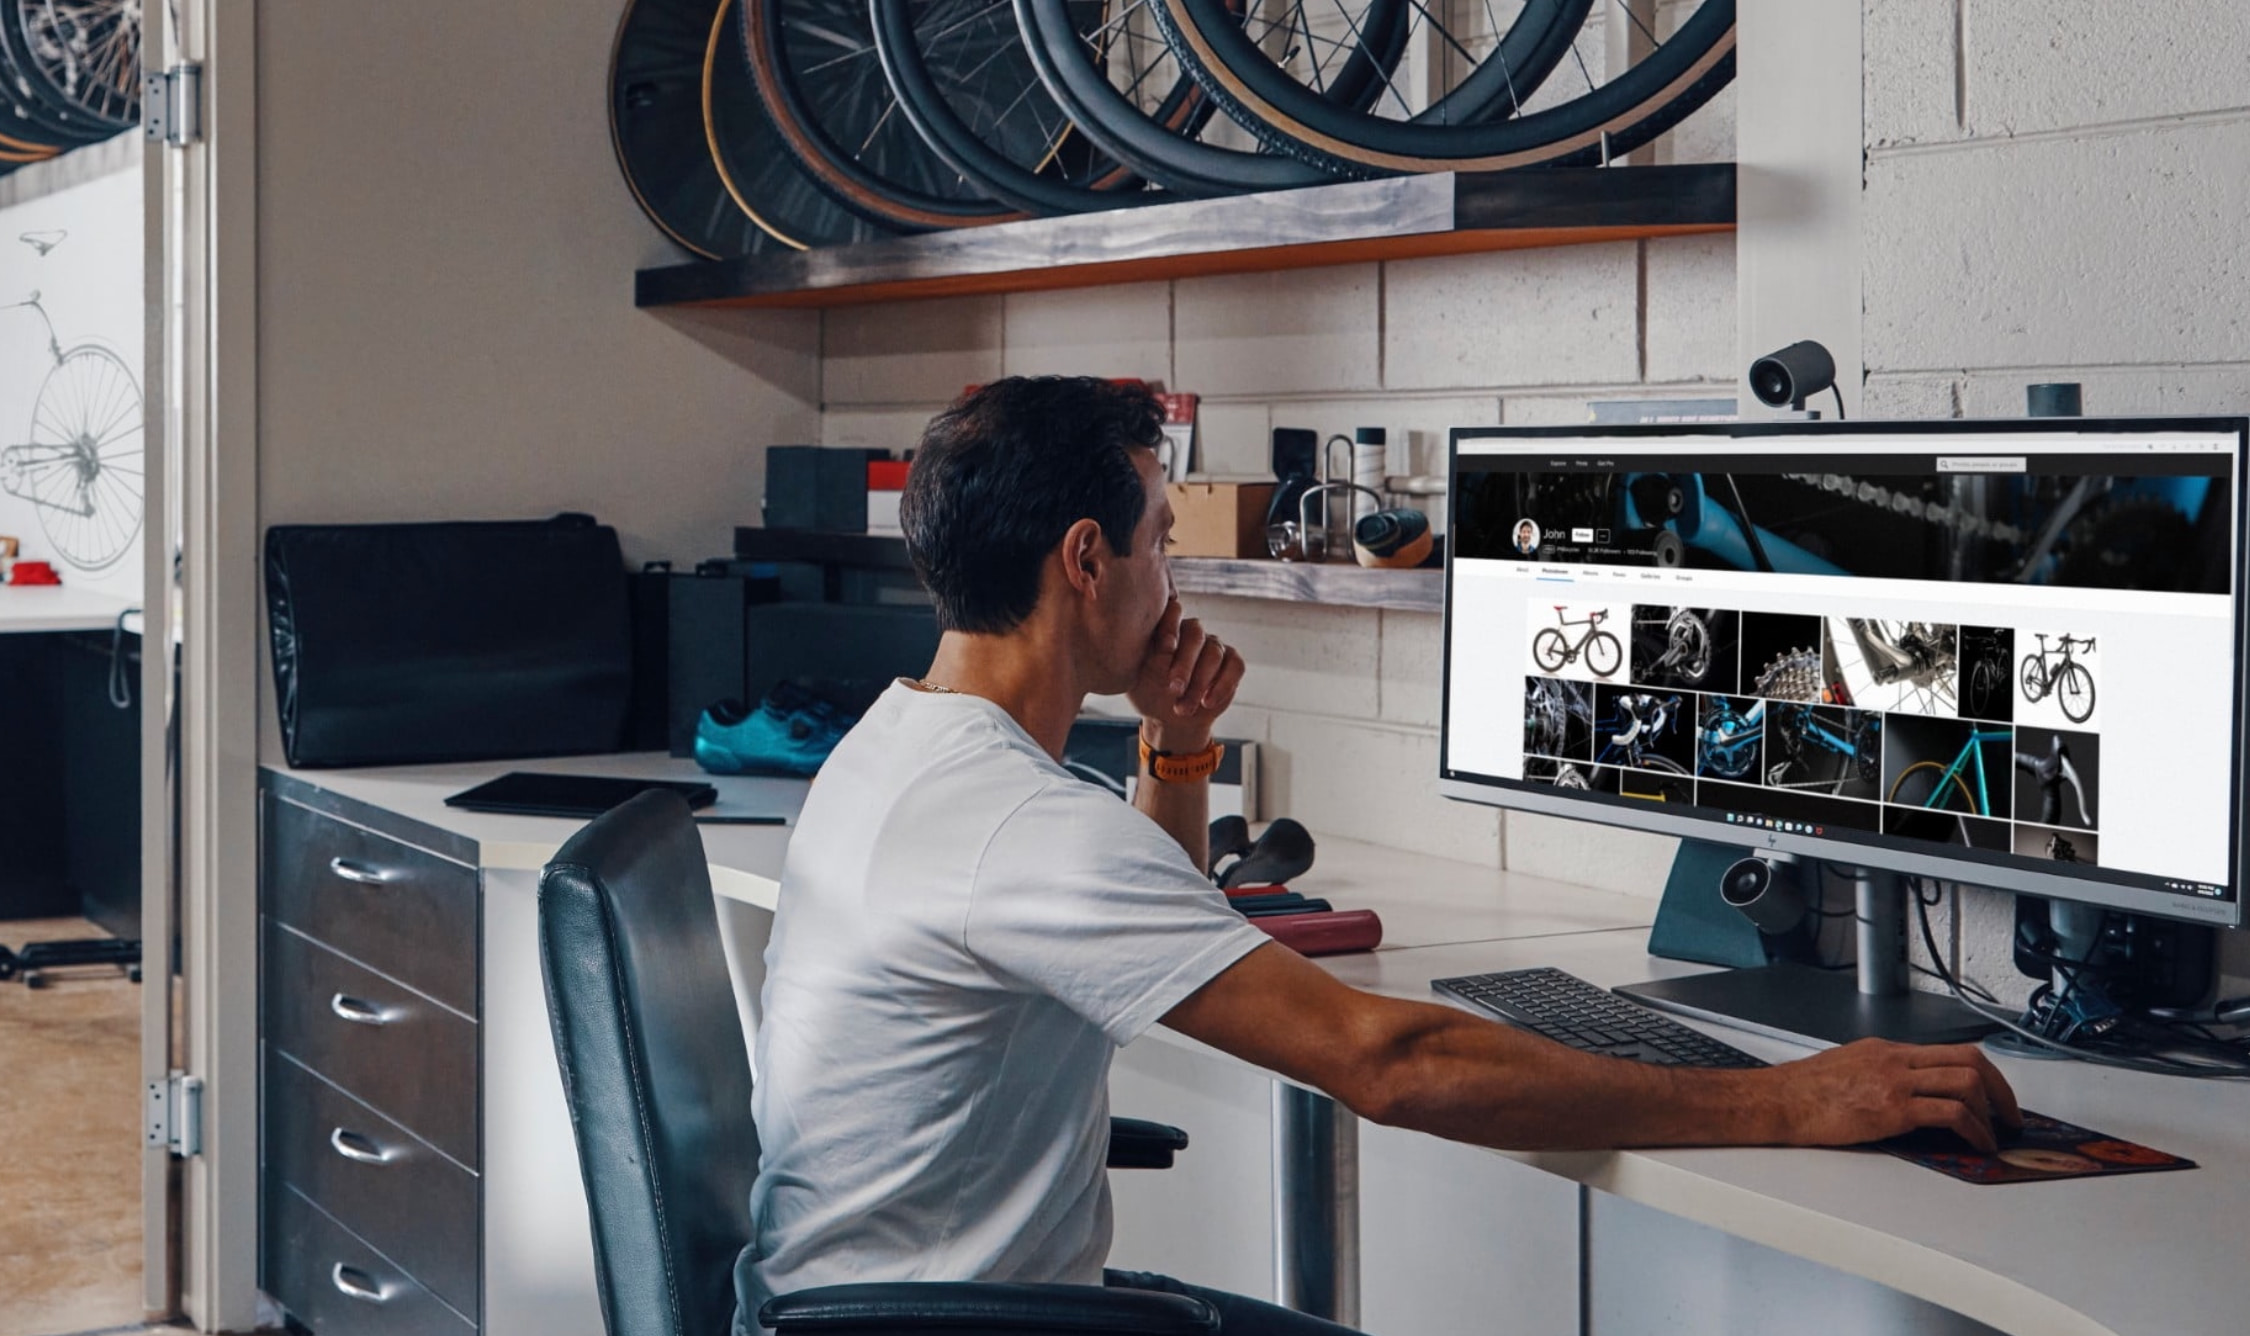 Man working on a computer looking at bike parts.